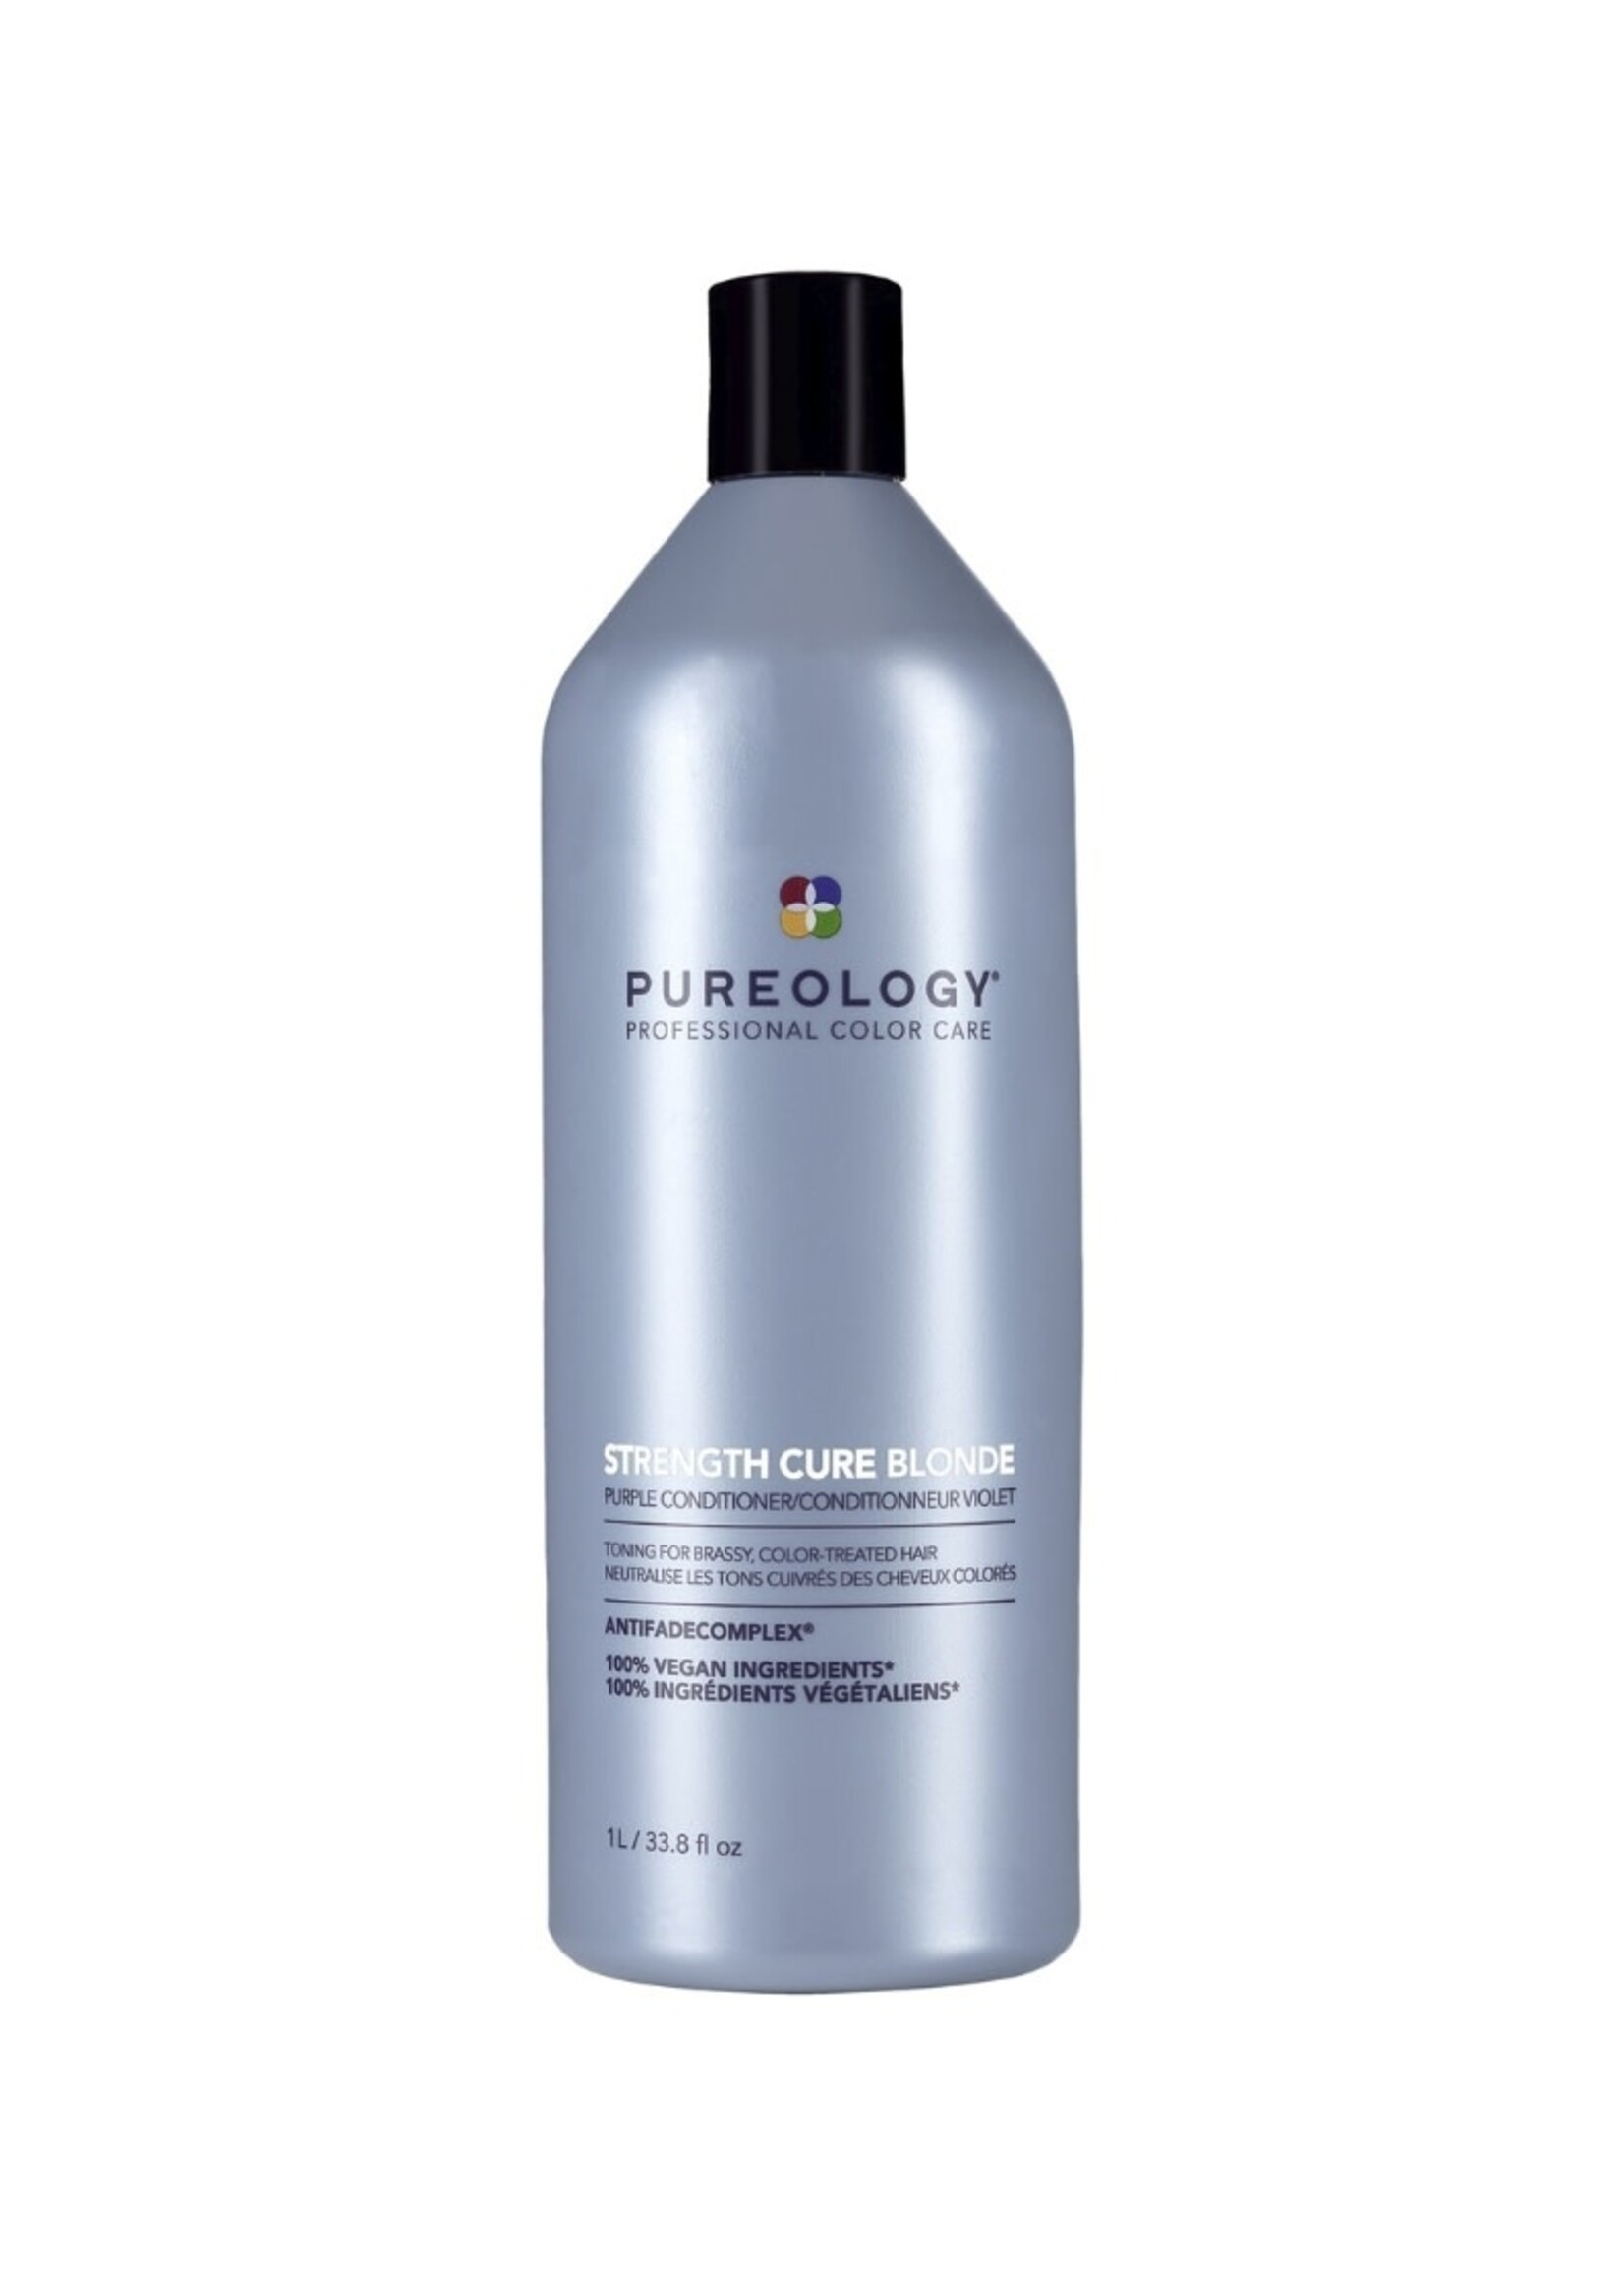 Pureology Pureology Strength Cure Blonde Purple Conditioner 1L